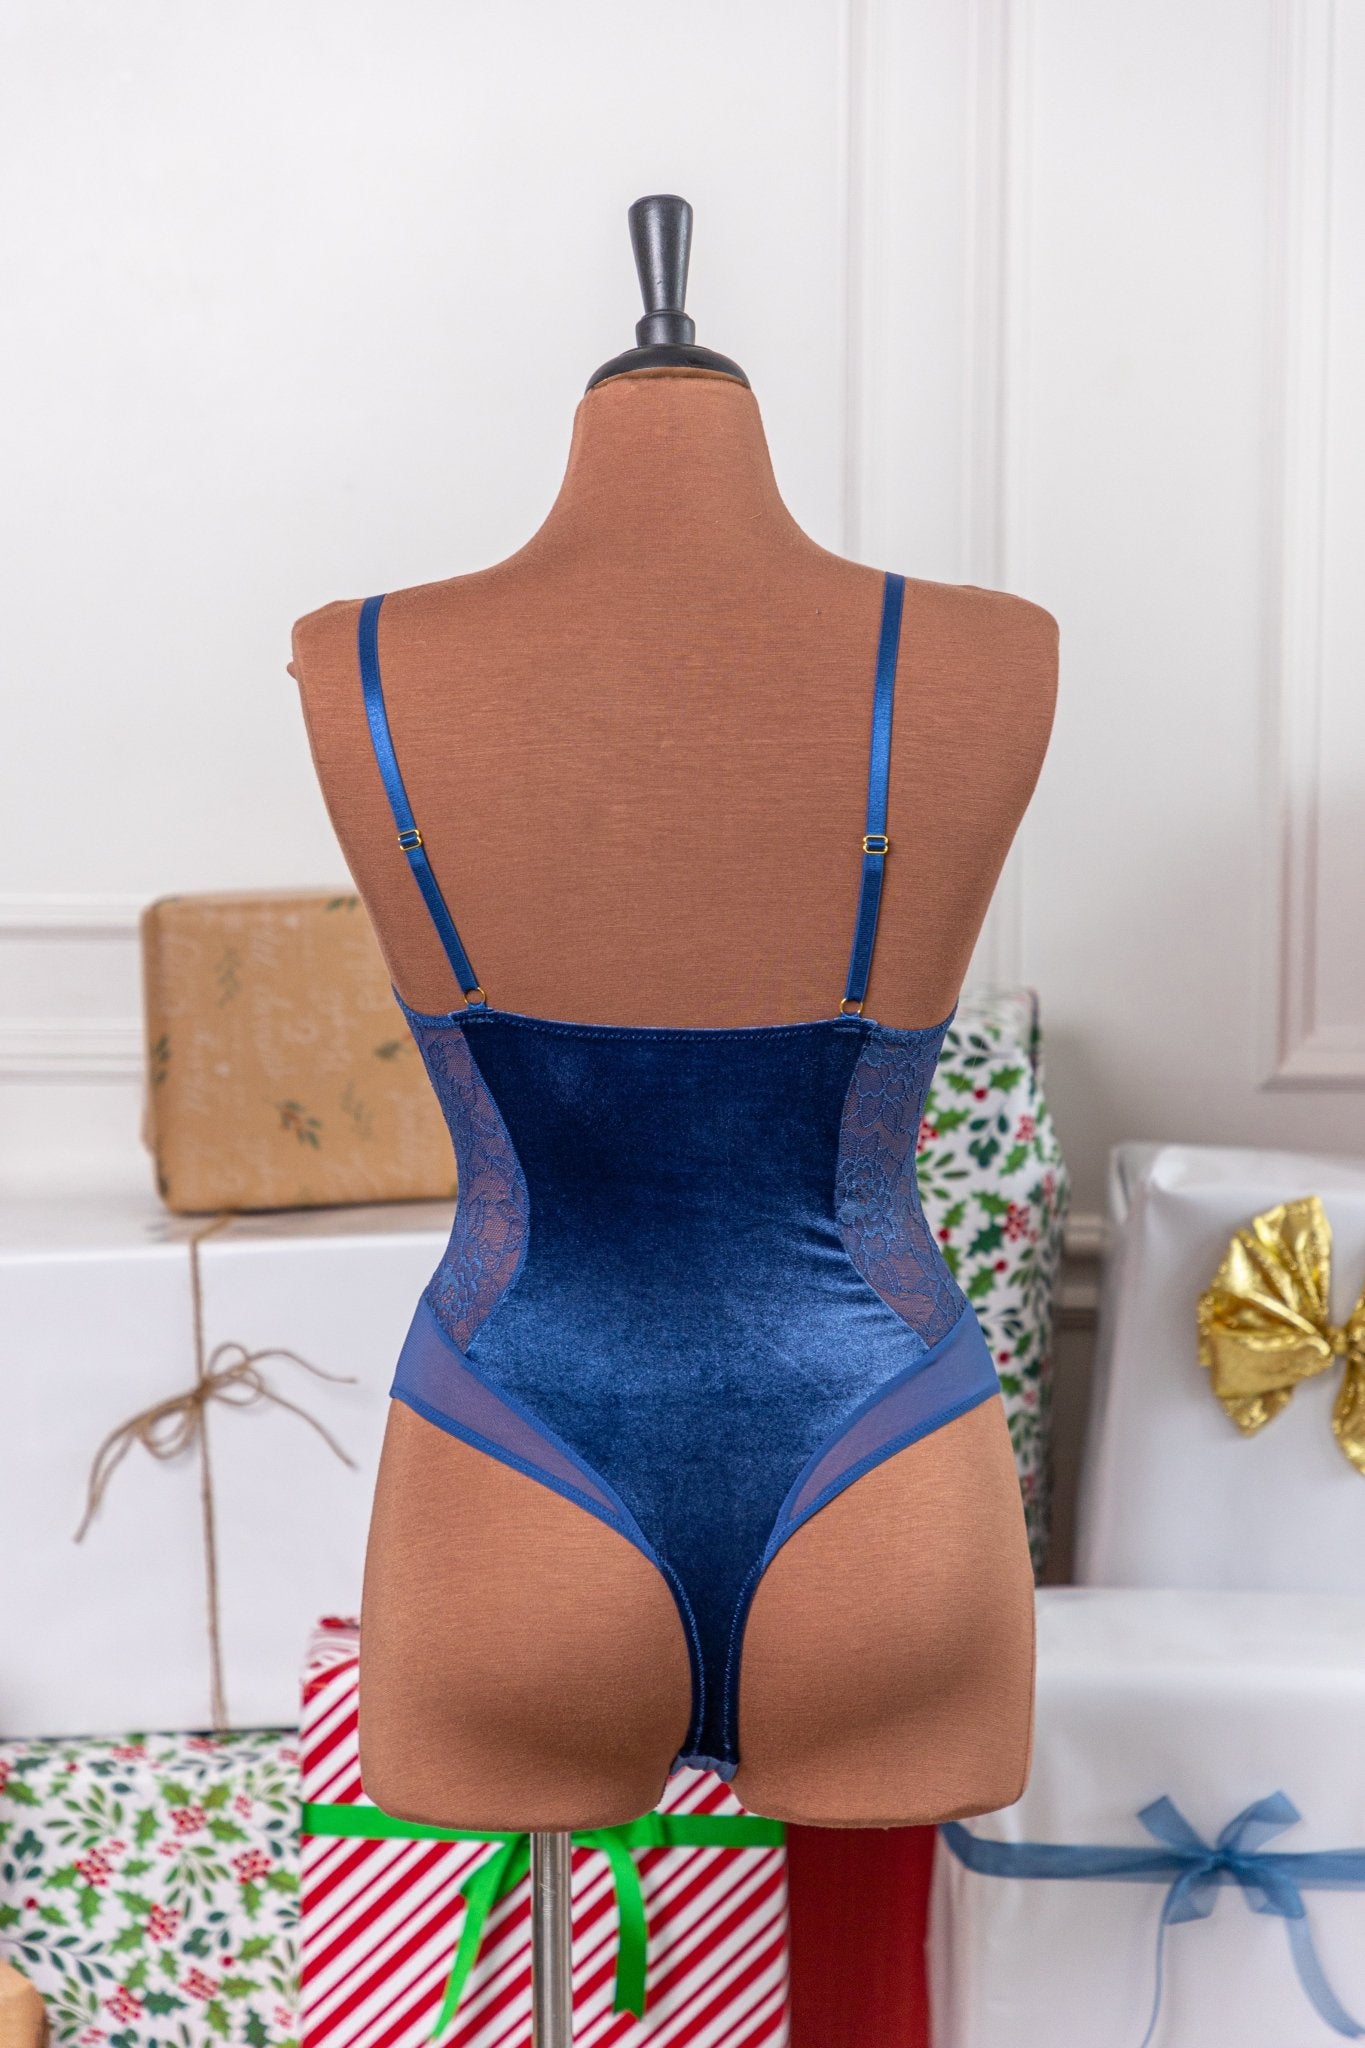 Lace & Velvet Crotchless Teddy - Navy - Mentionables